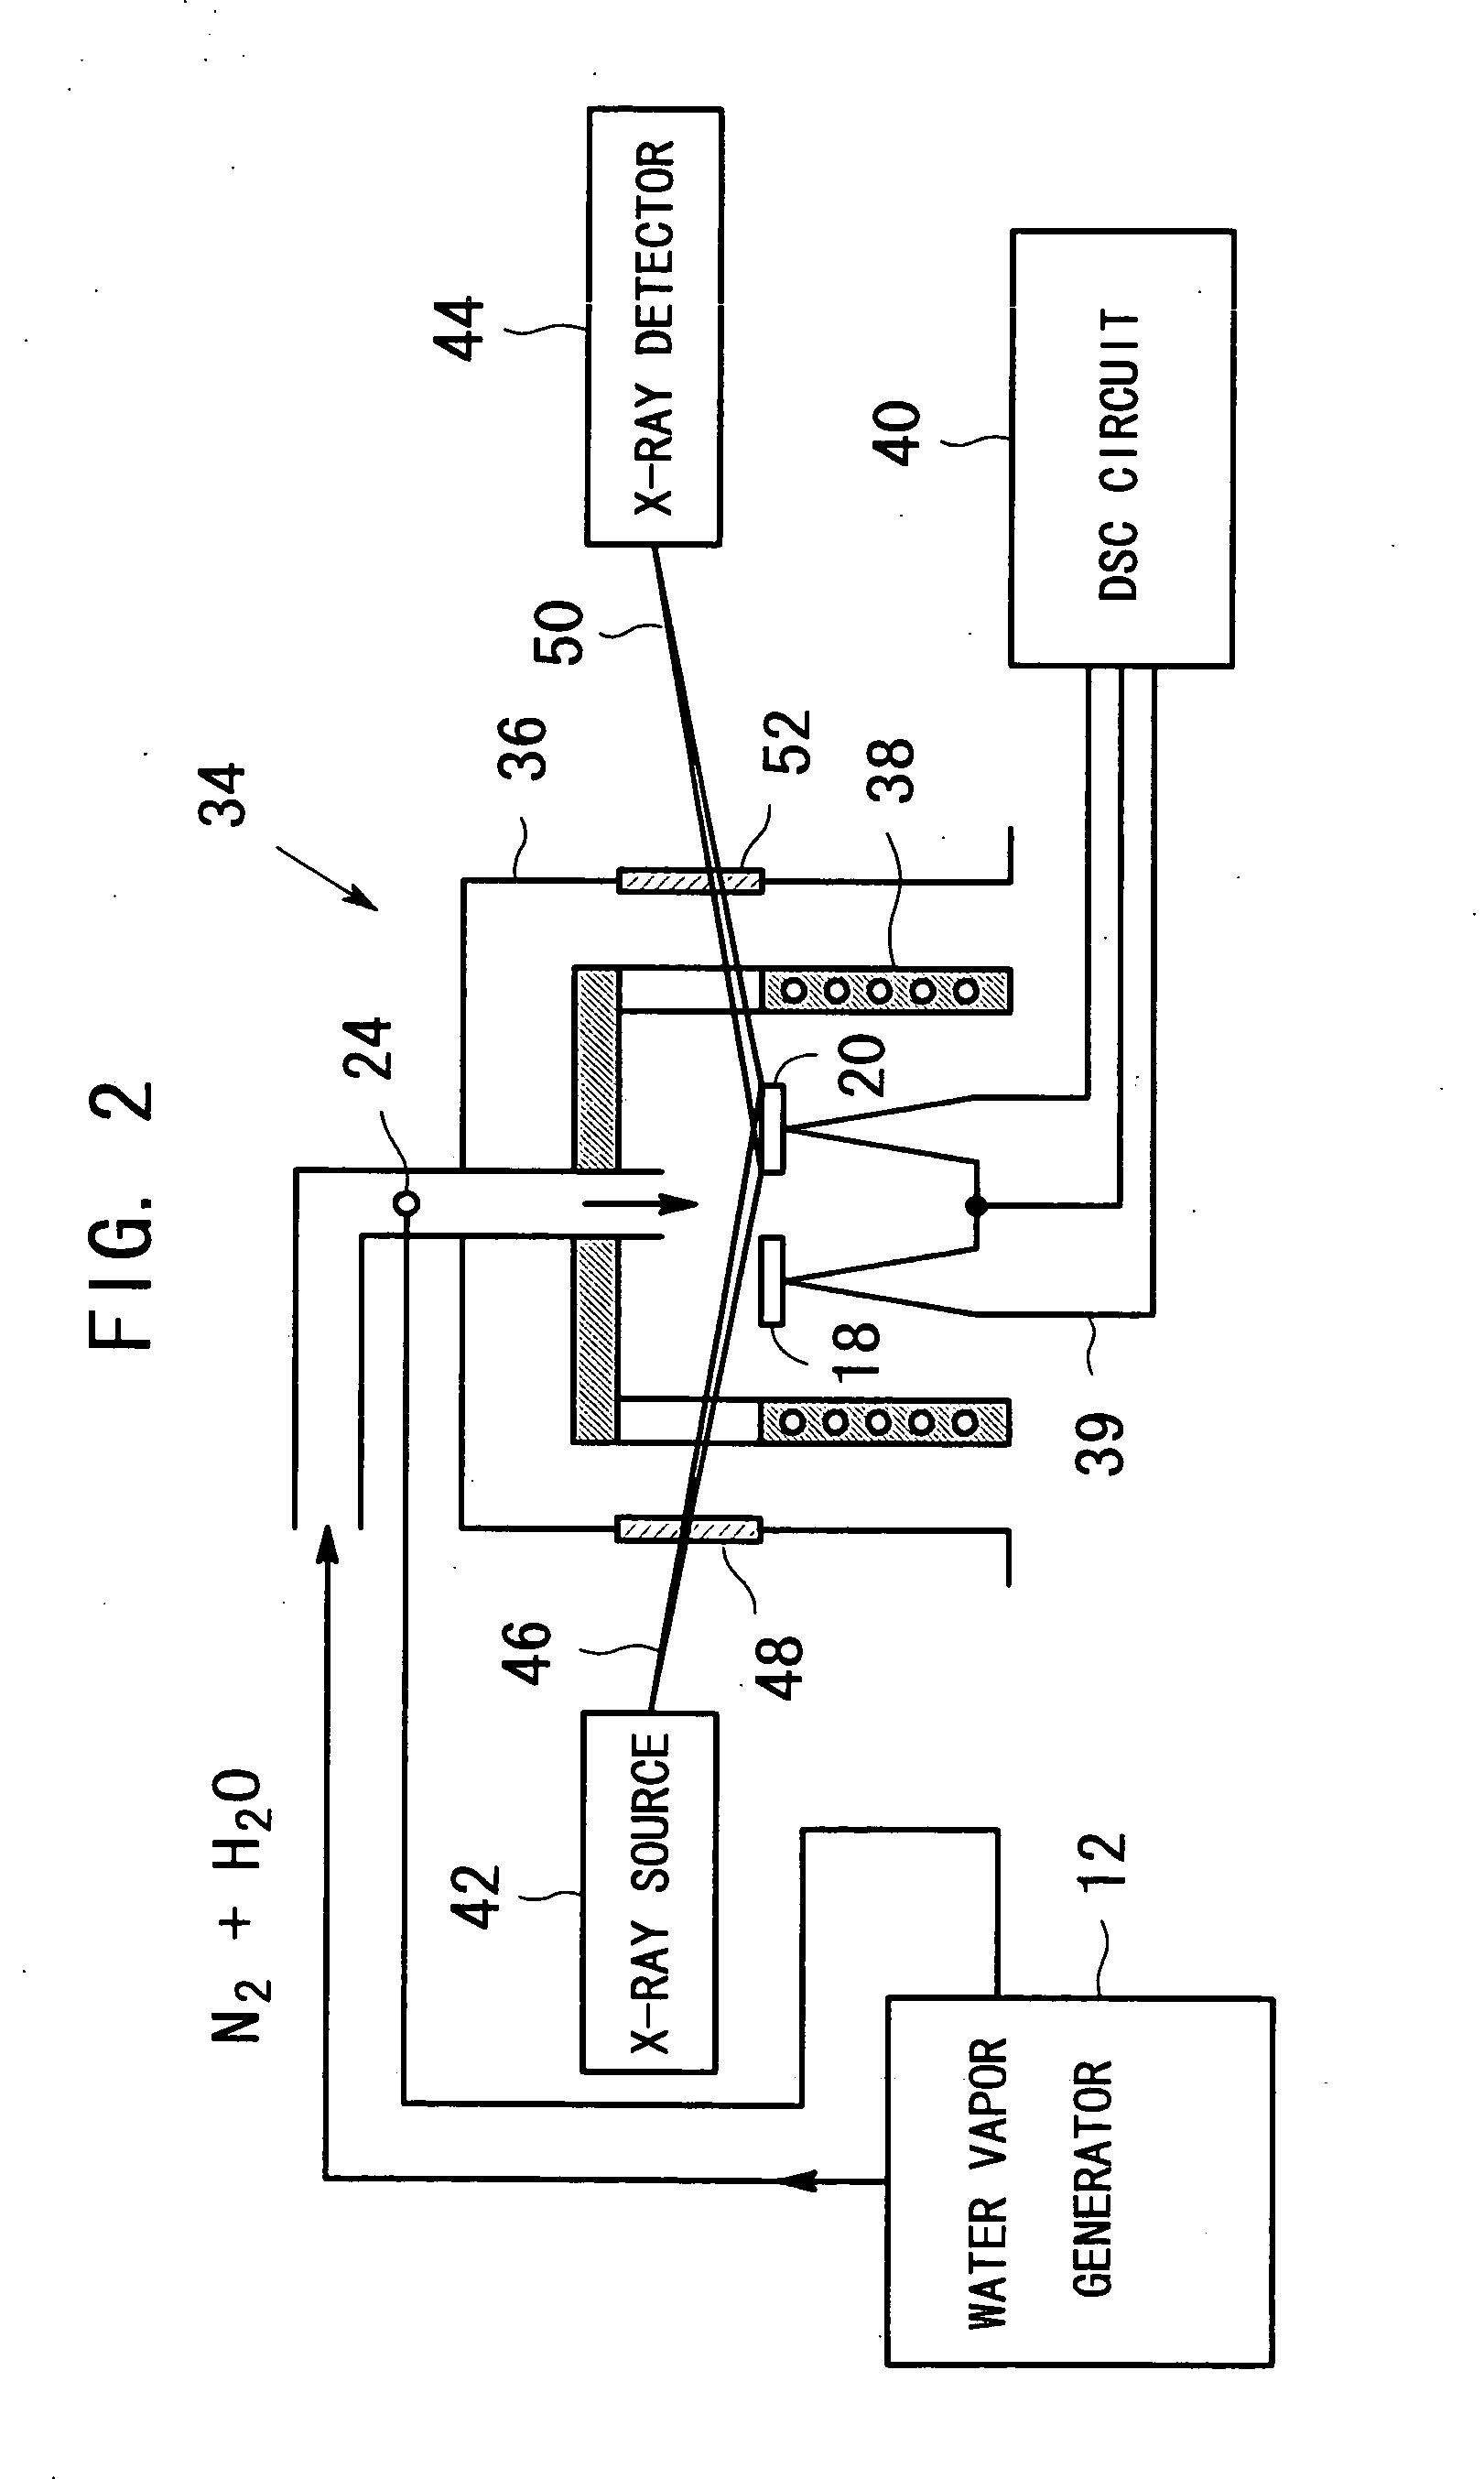 Apparatus for producing metal oxide